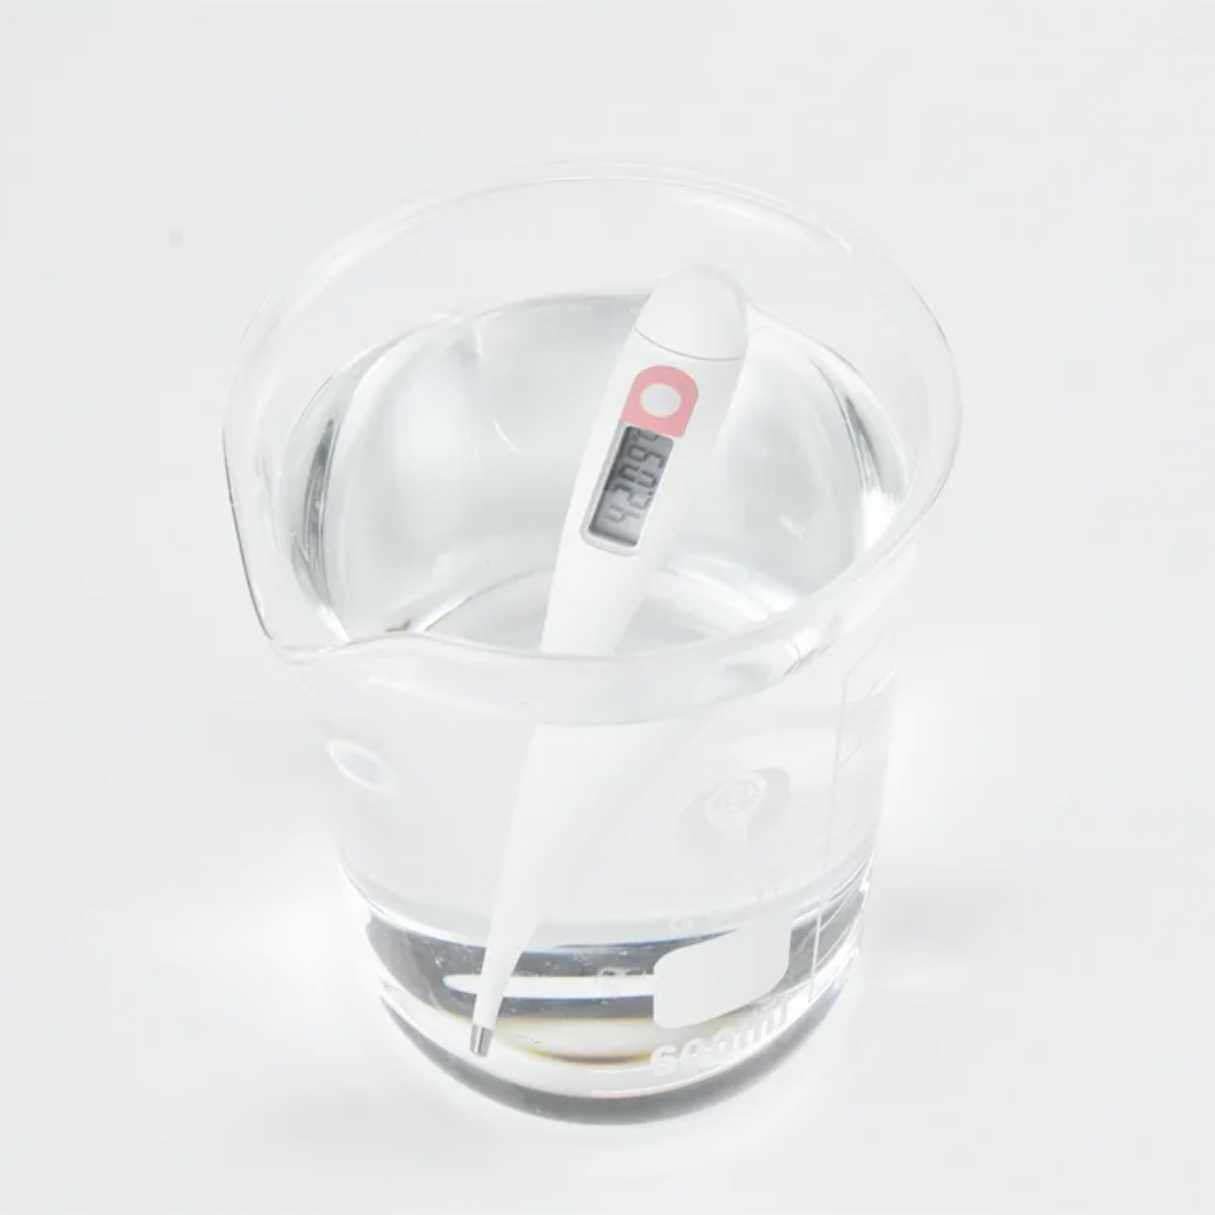 Thermometer in glass of water displaying waterprood digital bbt for tracking ovulation date